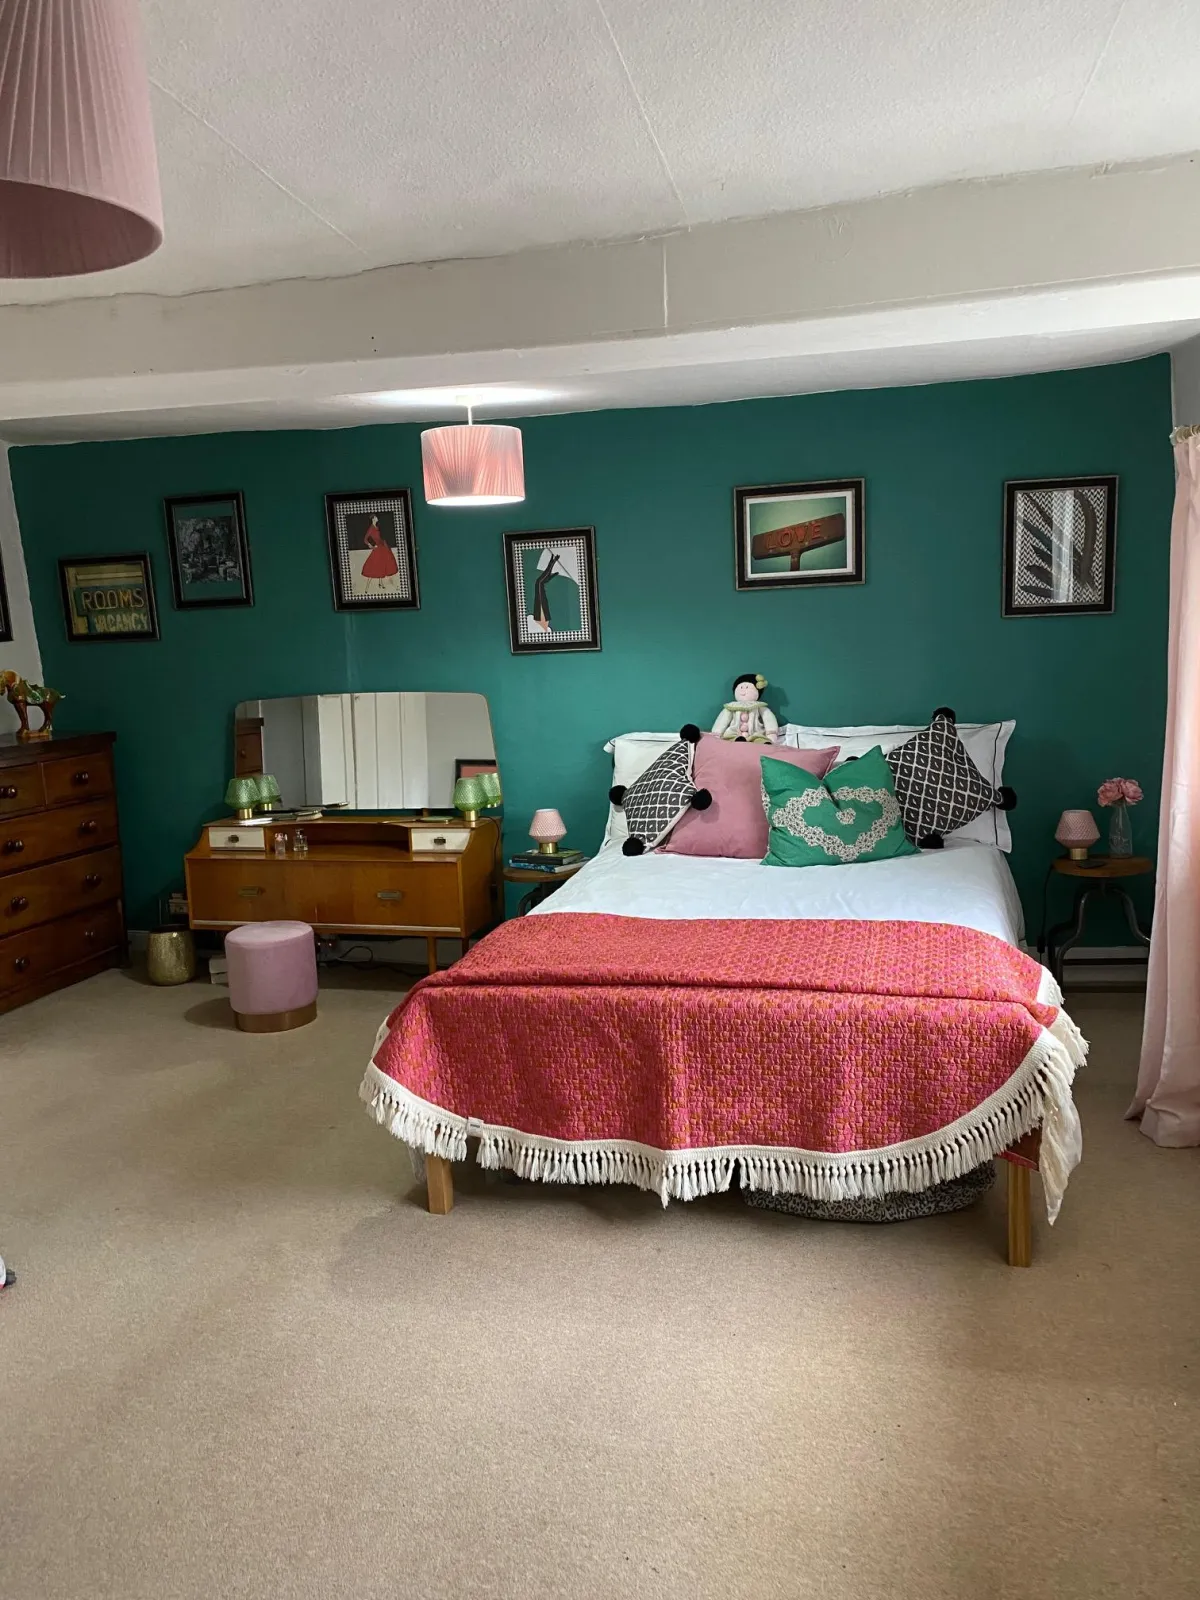 Pink and green themed bedroom